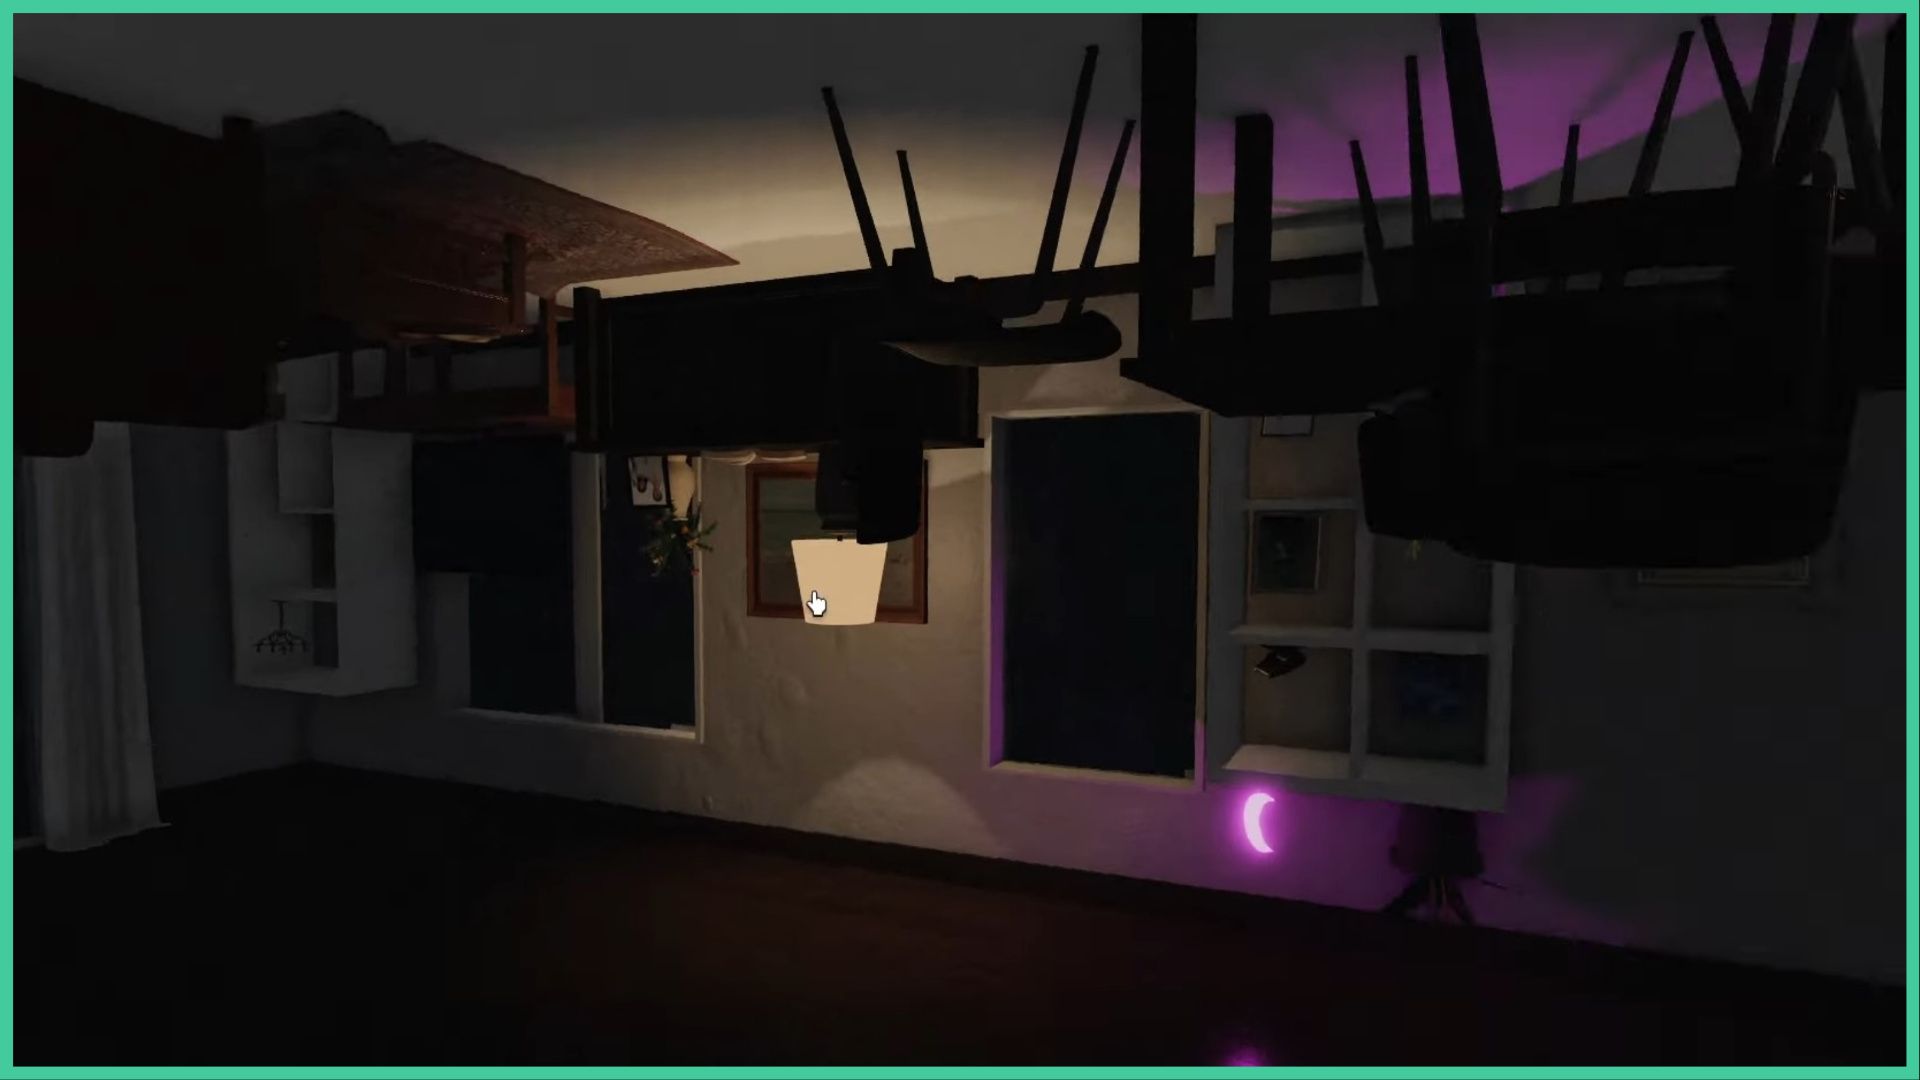 feature image for our short creepy stories homecoming guide, the image features a screenshot from the game of the living room, but everything has been turned upside down, and the furniture is now on the ceiling